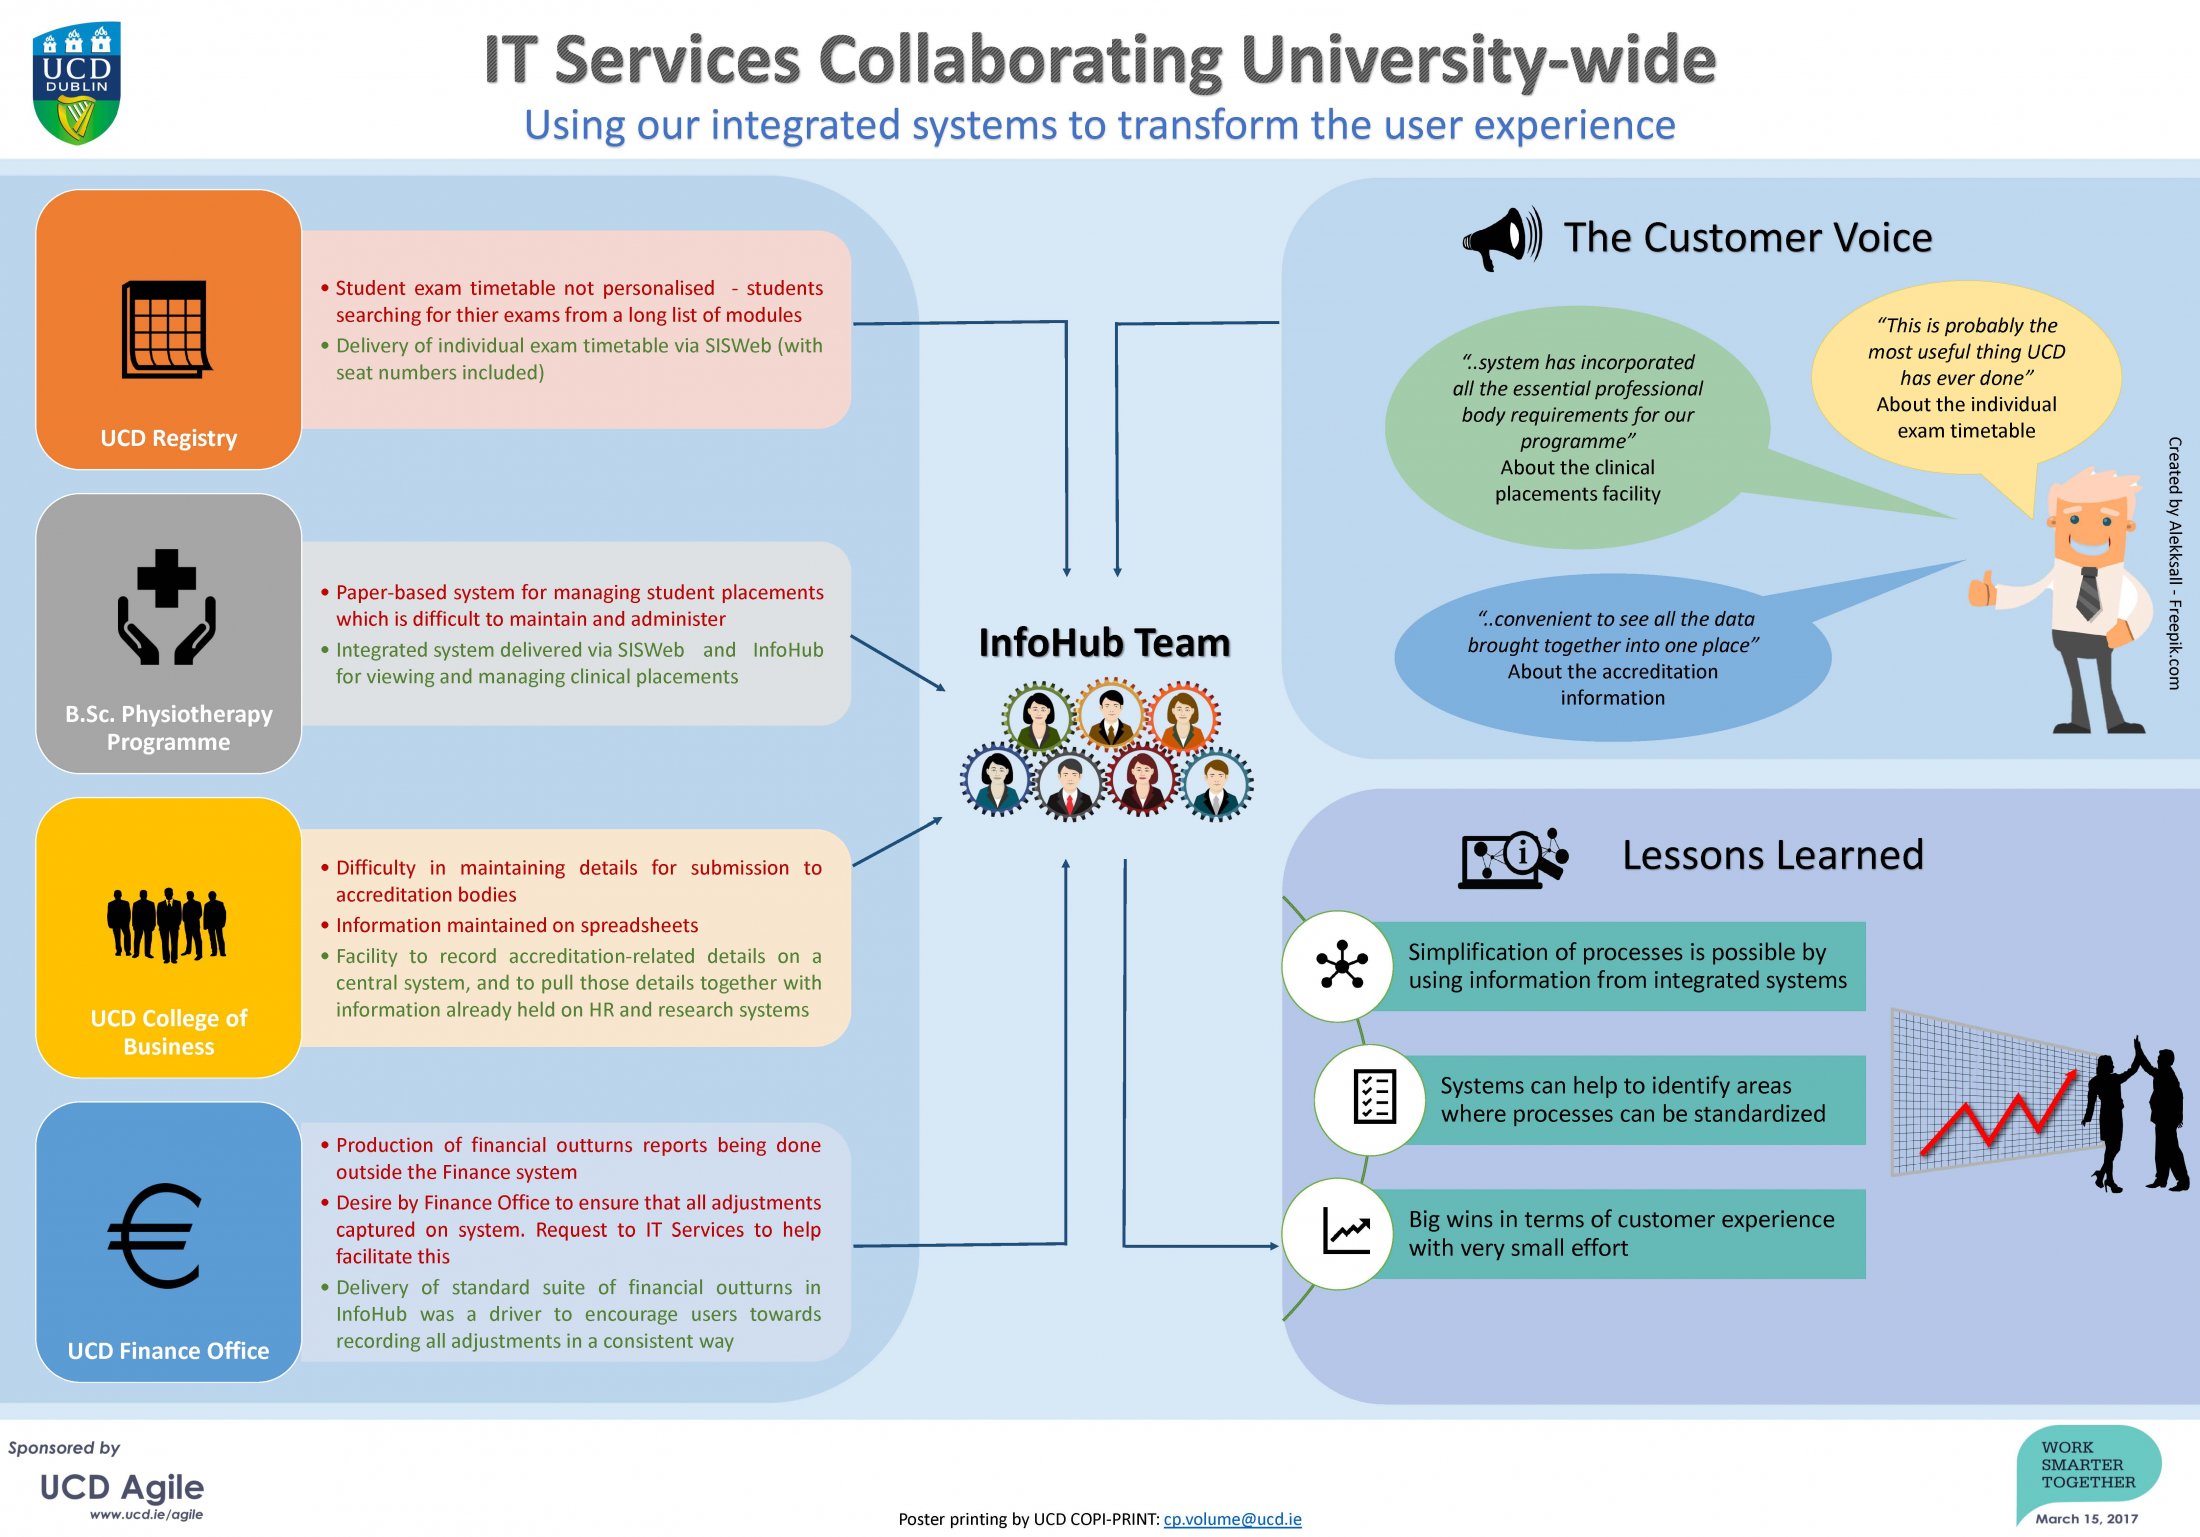 21. IT Services Collaborating University Wide